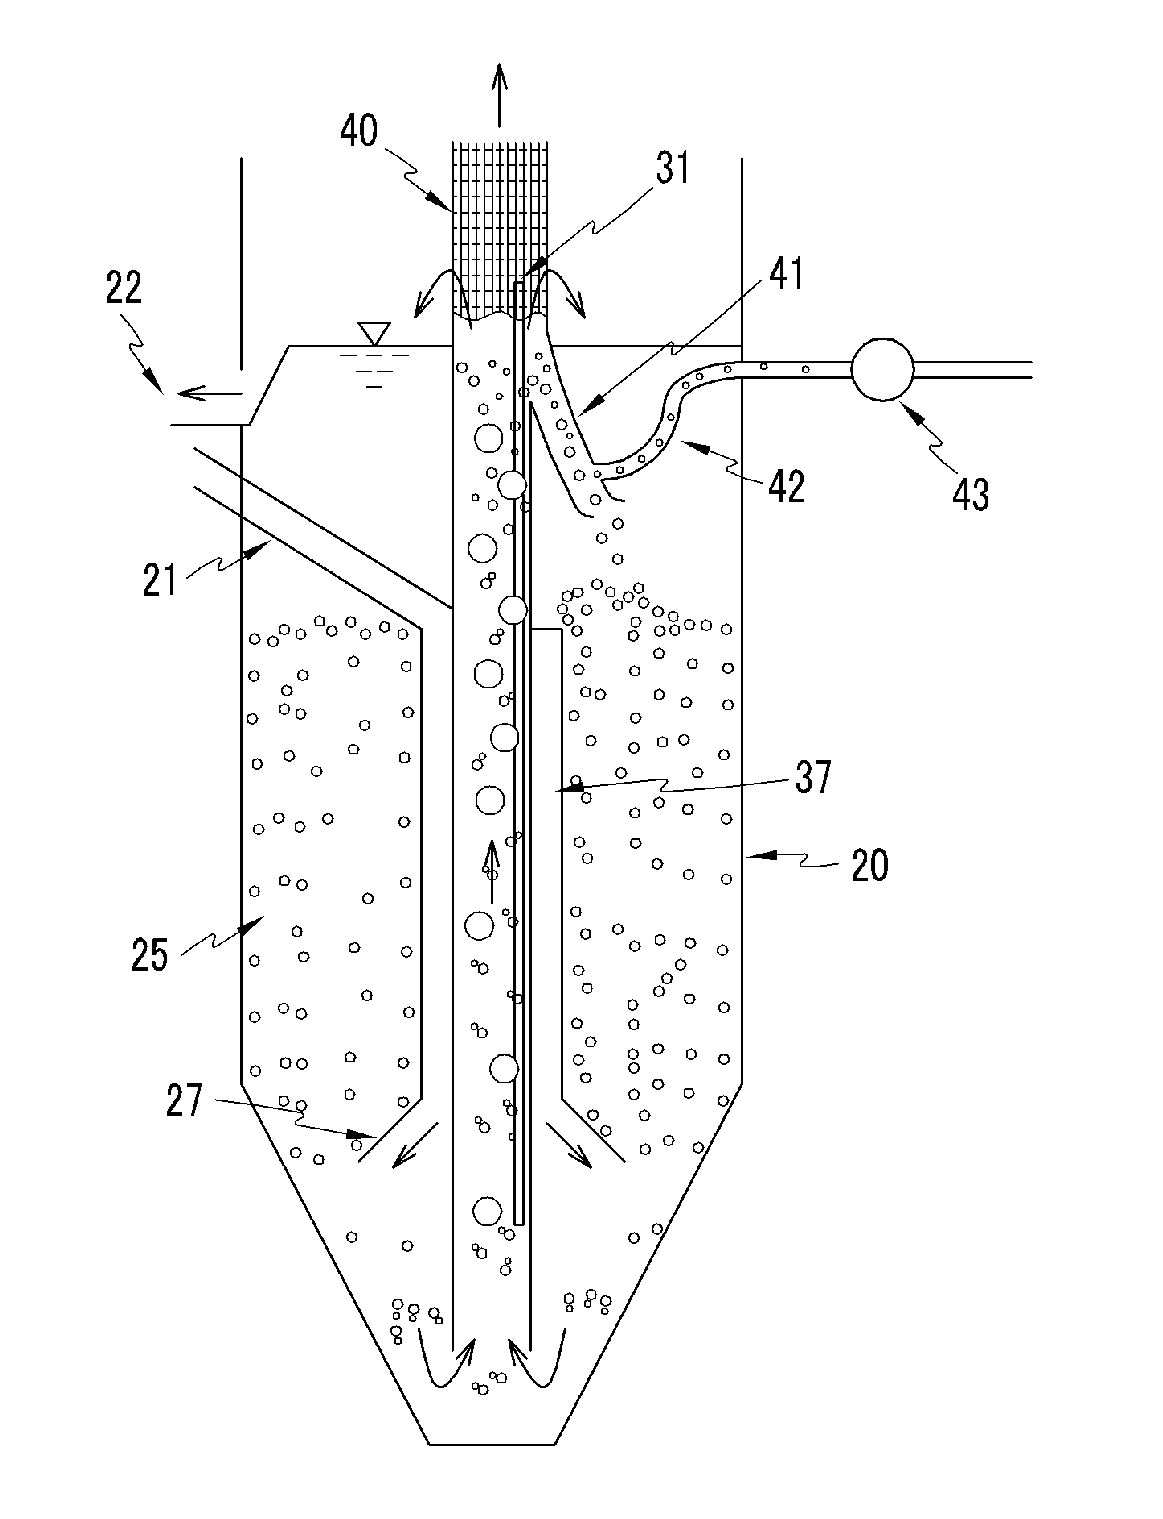 Continuous circulation sand filter and continuous circulation sand filtering method